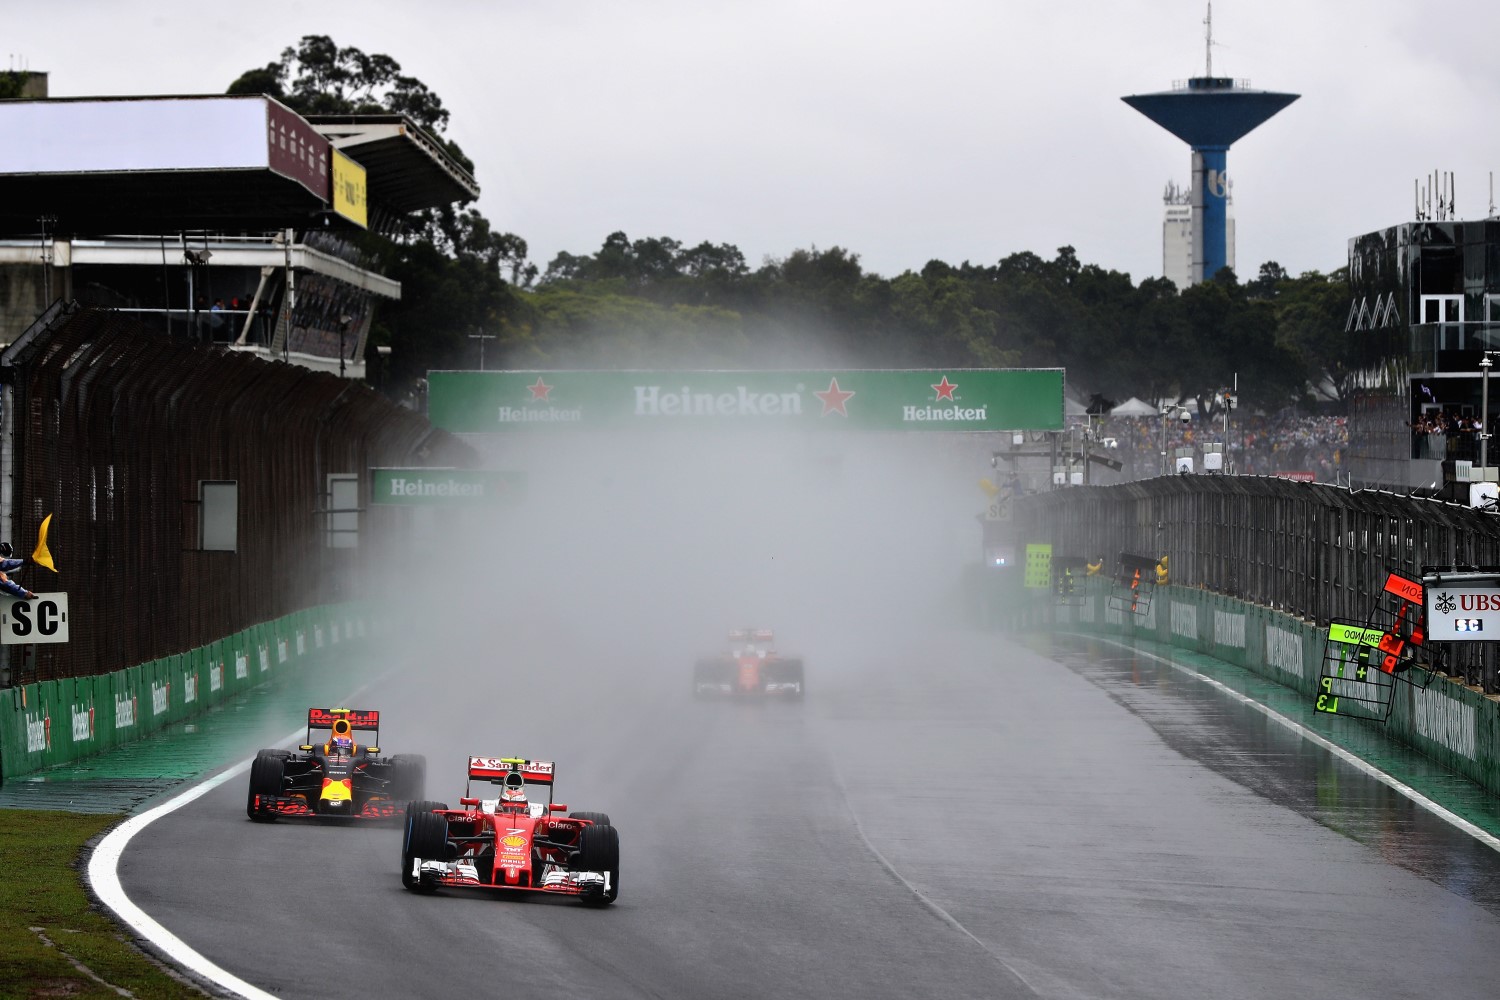 Verstappen had new rain tires at the end of the race while everyone had theirs on since the beginning and they were very worn. So of course Verstappen was much faster than everyone else.  The F1 media is fawning all over Verstappen as if he is the second coming of Senna, which of course he is not.